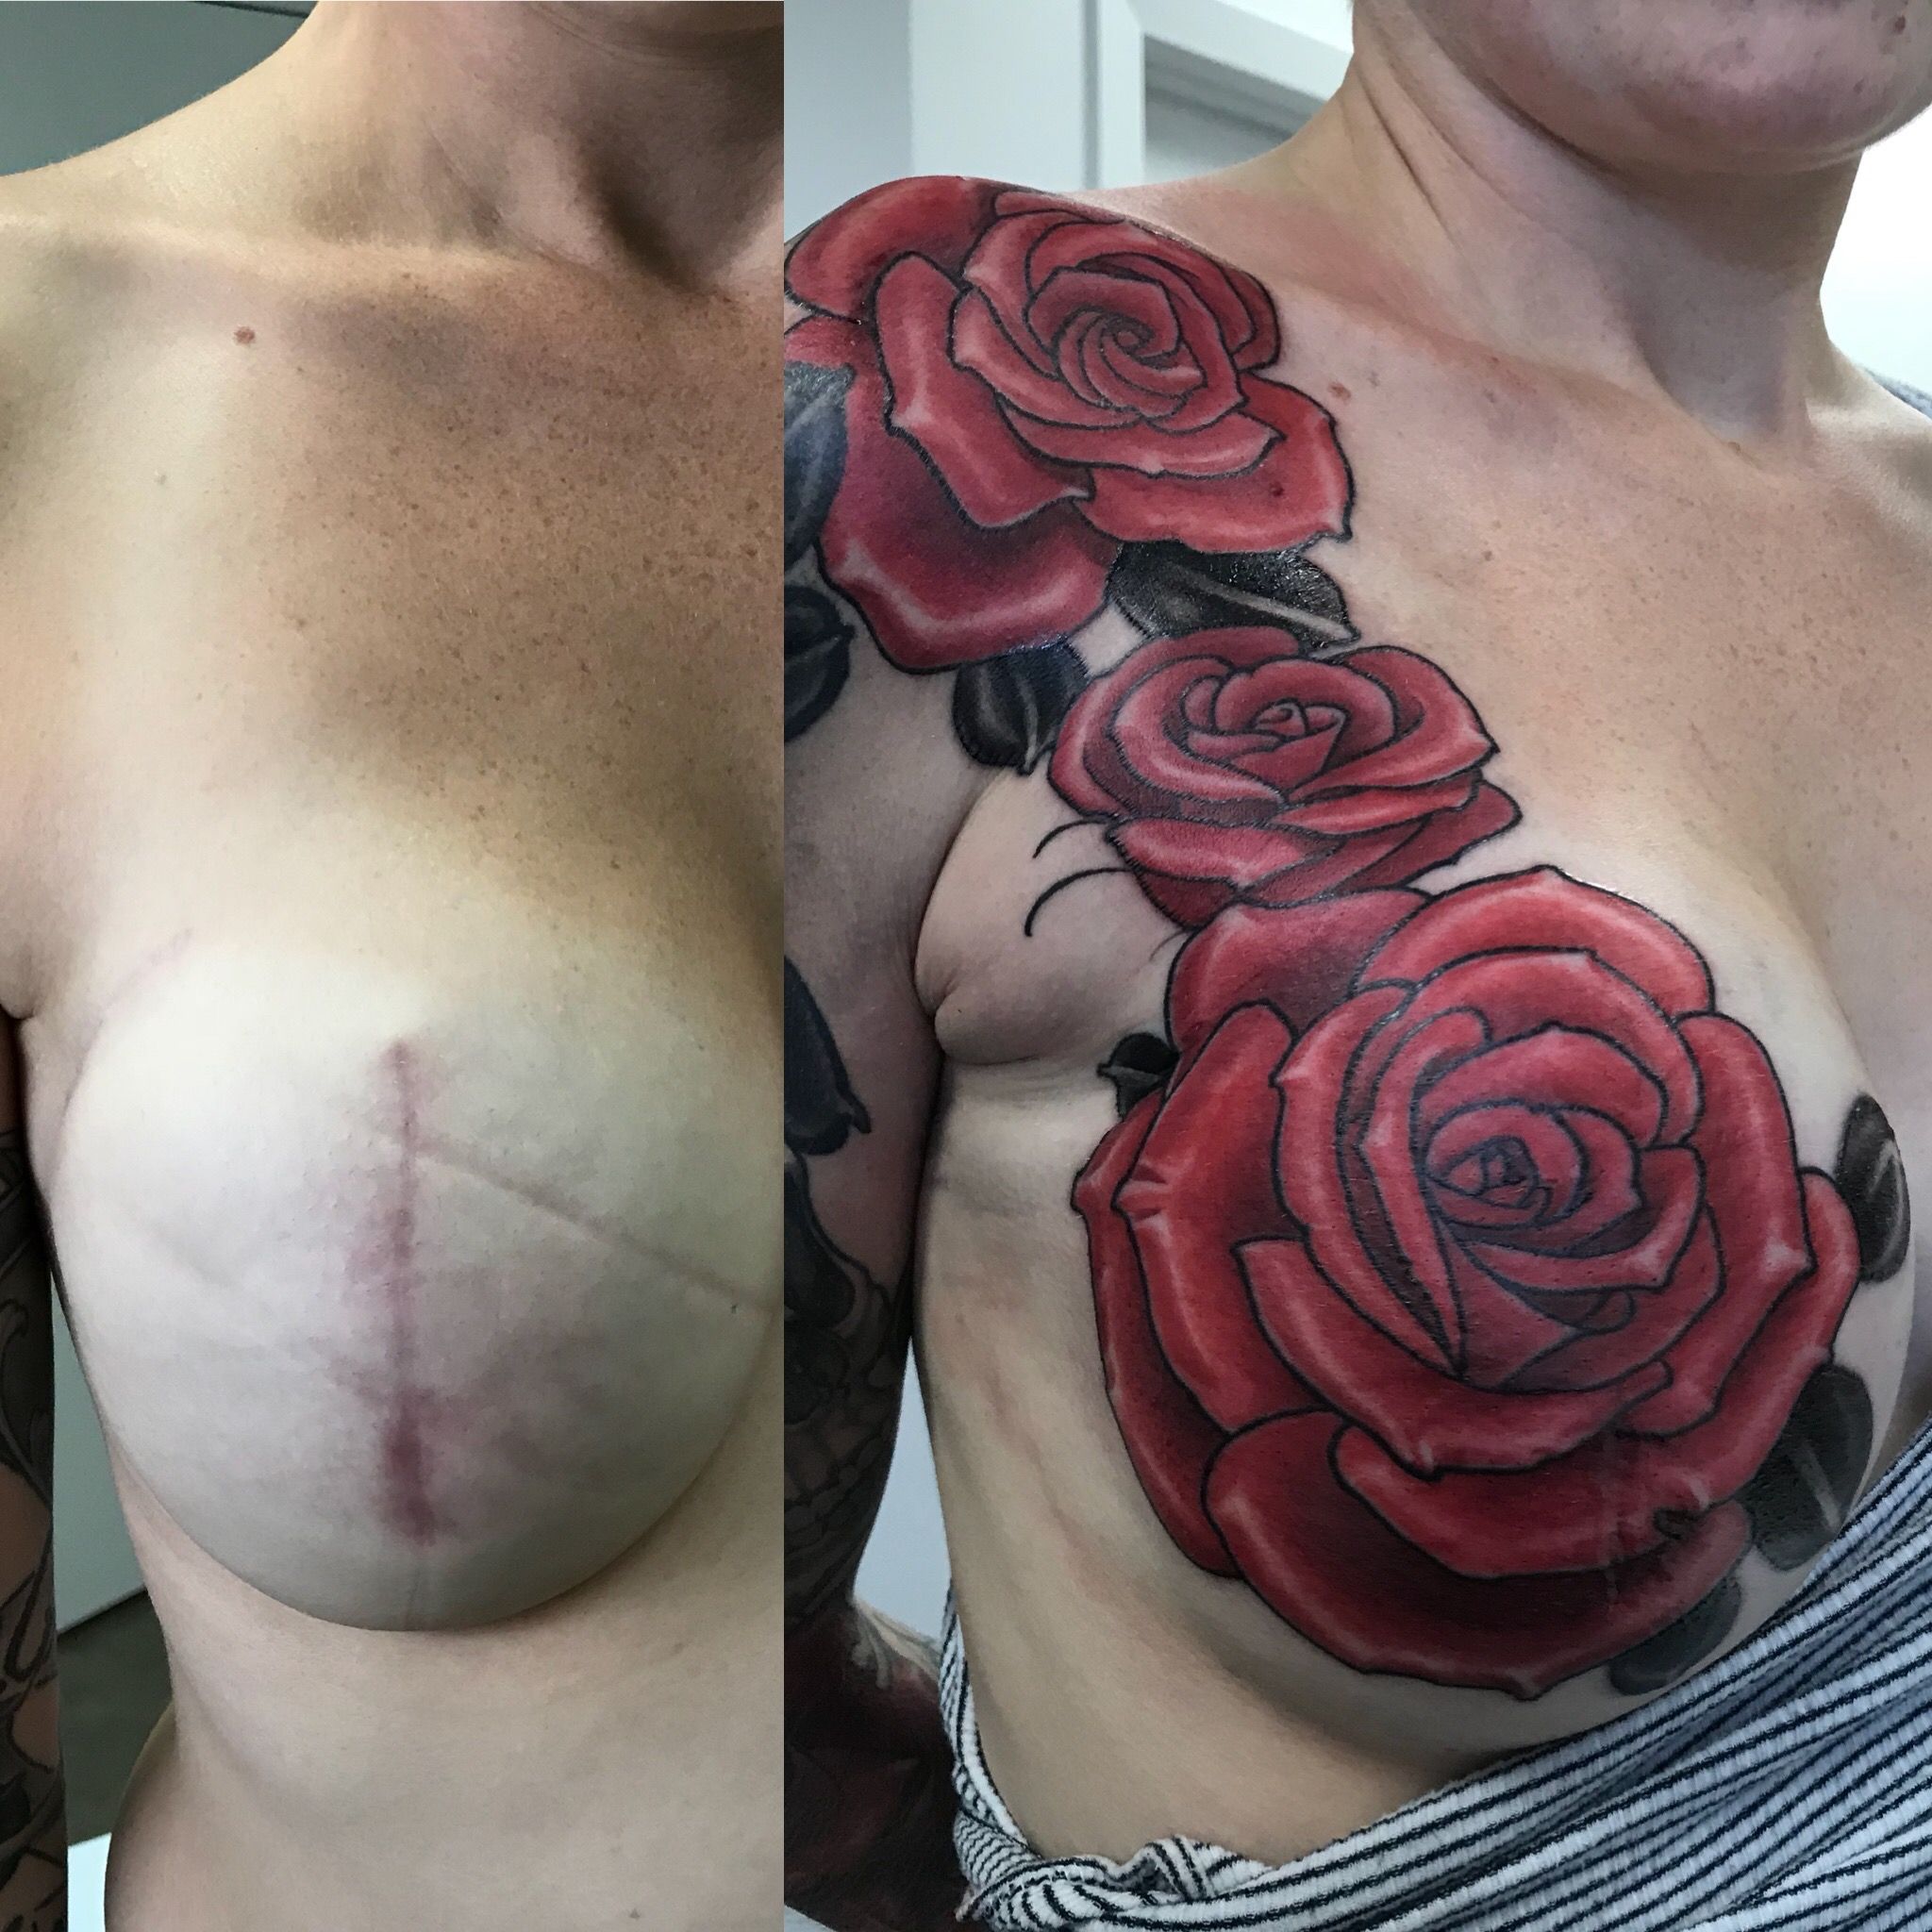 Mastectomy Tattoos: Information, Health Risks, Ideas and More